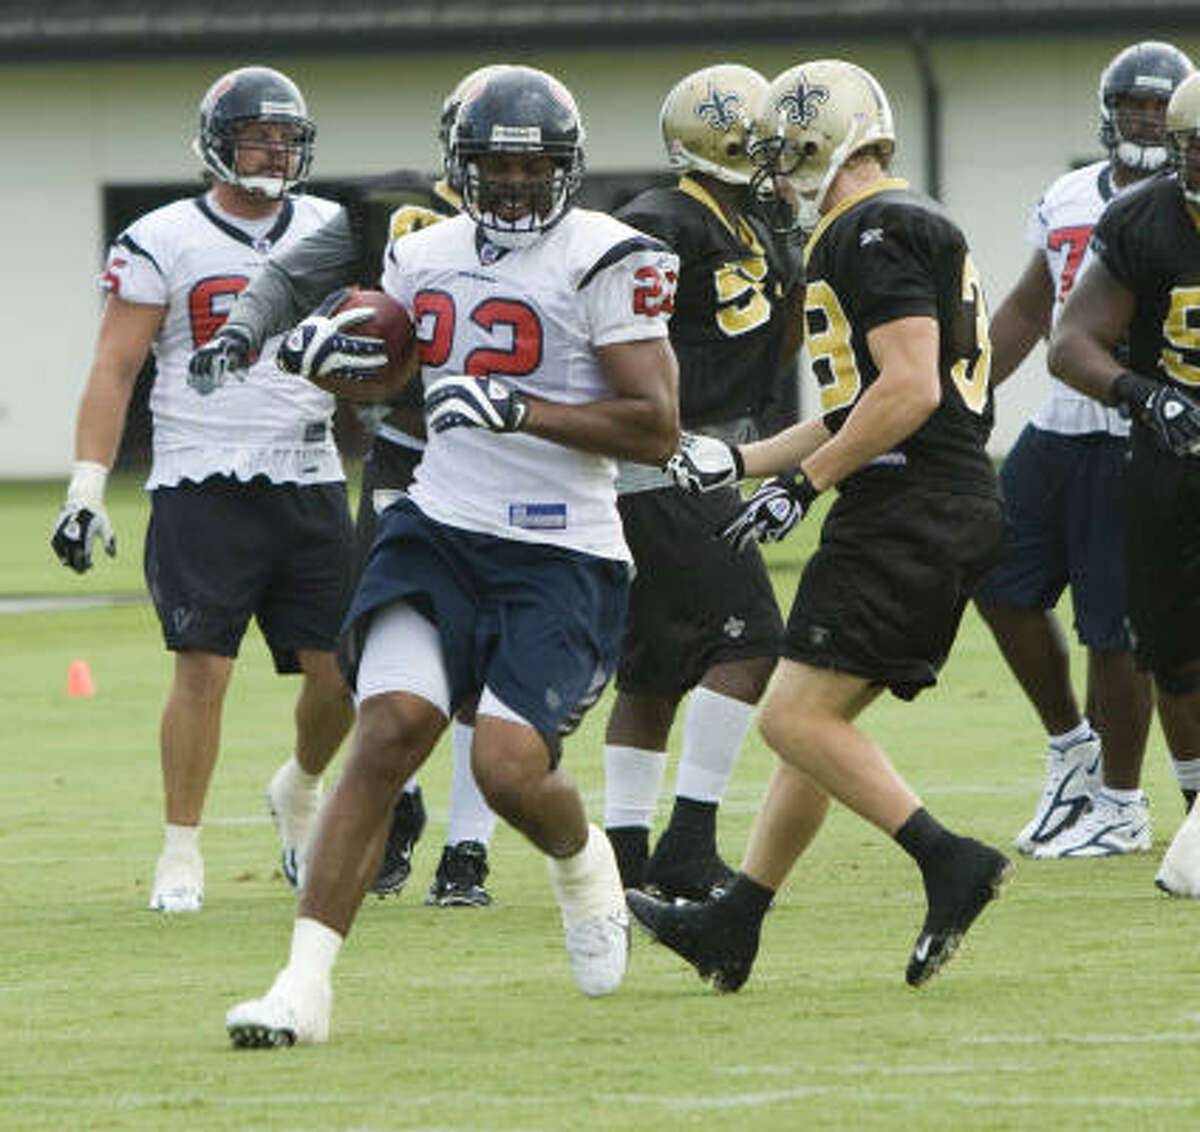 2. Who will back up Steve Slaton? After Slaton’s strong rookie campaign, there is no question going into the season who the starting running back will be for the Texans. Chris Brown (pictured) Ryan Moats, Jeremiah Johnson, Arian Foster and Clifton Dawson all want the chance to be his primary backup.